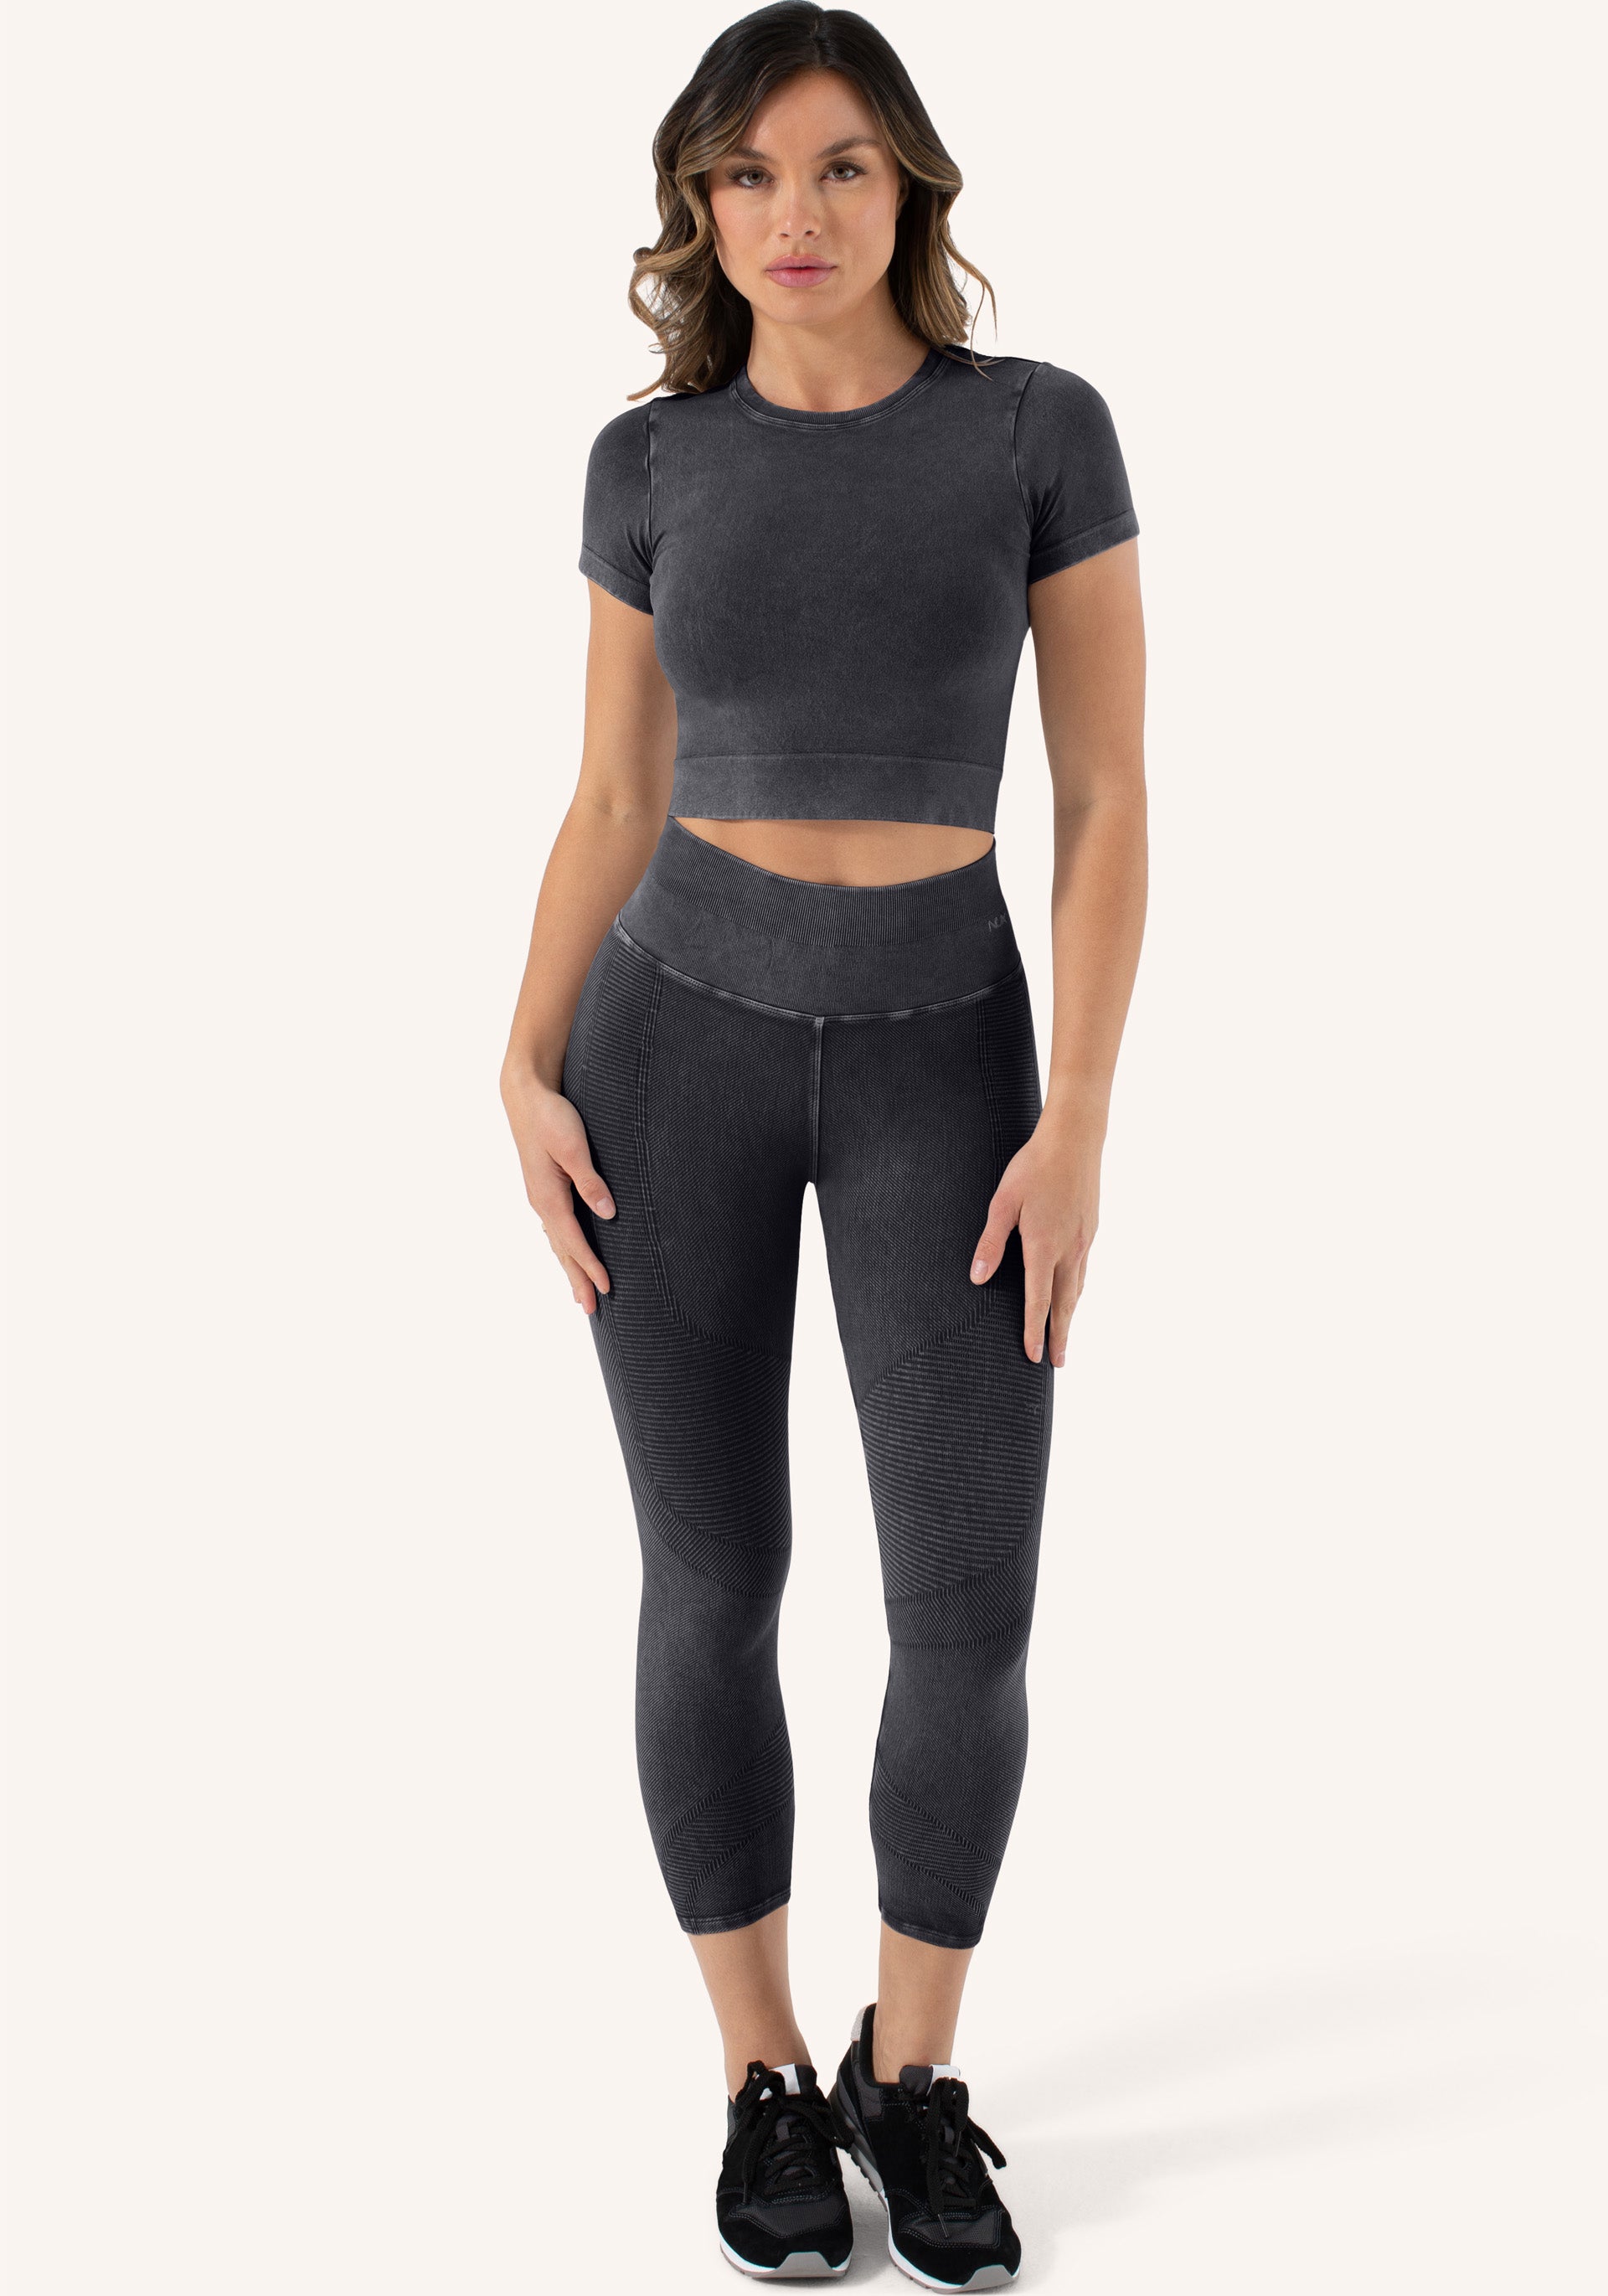 Peloton Apparel Women's Grey Slit Leggings, Size Small Brand New Without  Tags : r/gym_apparel_for_women